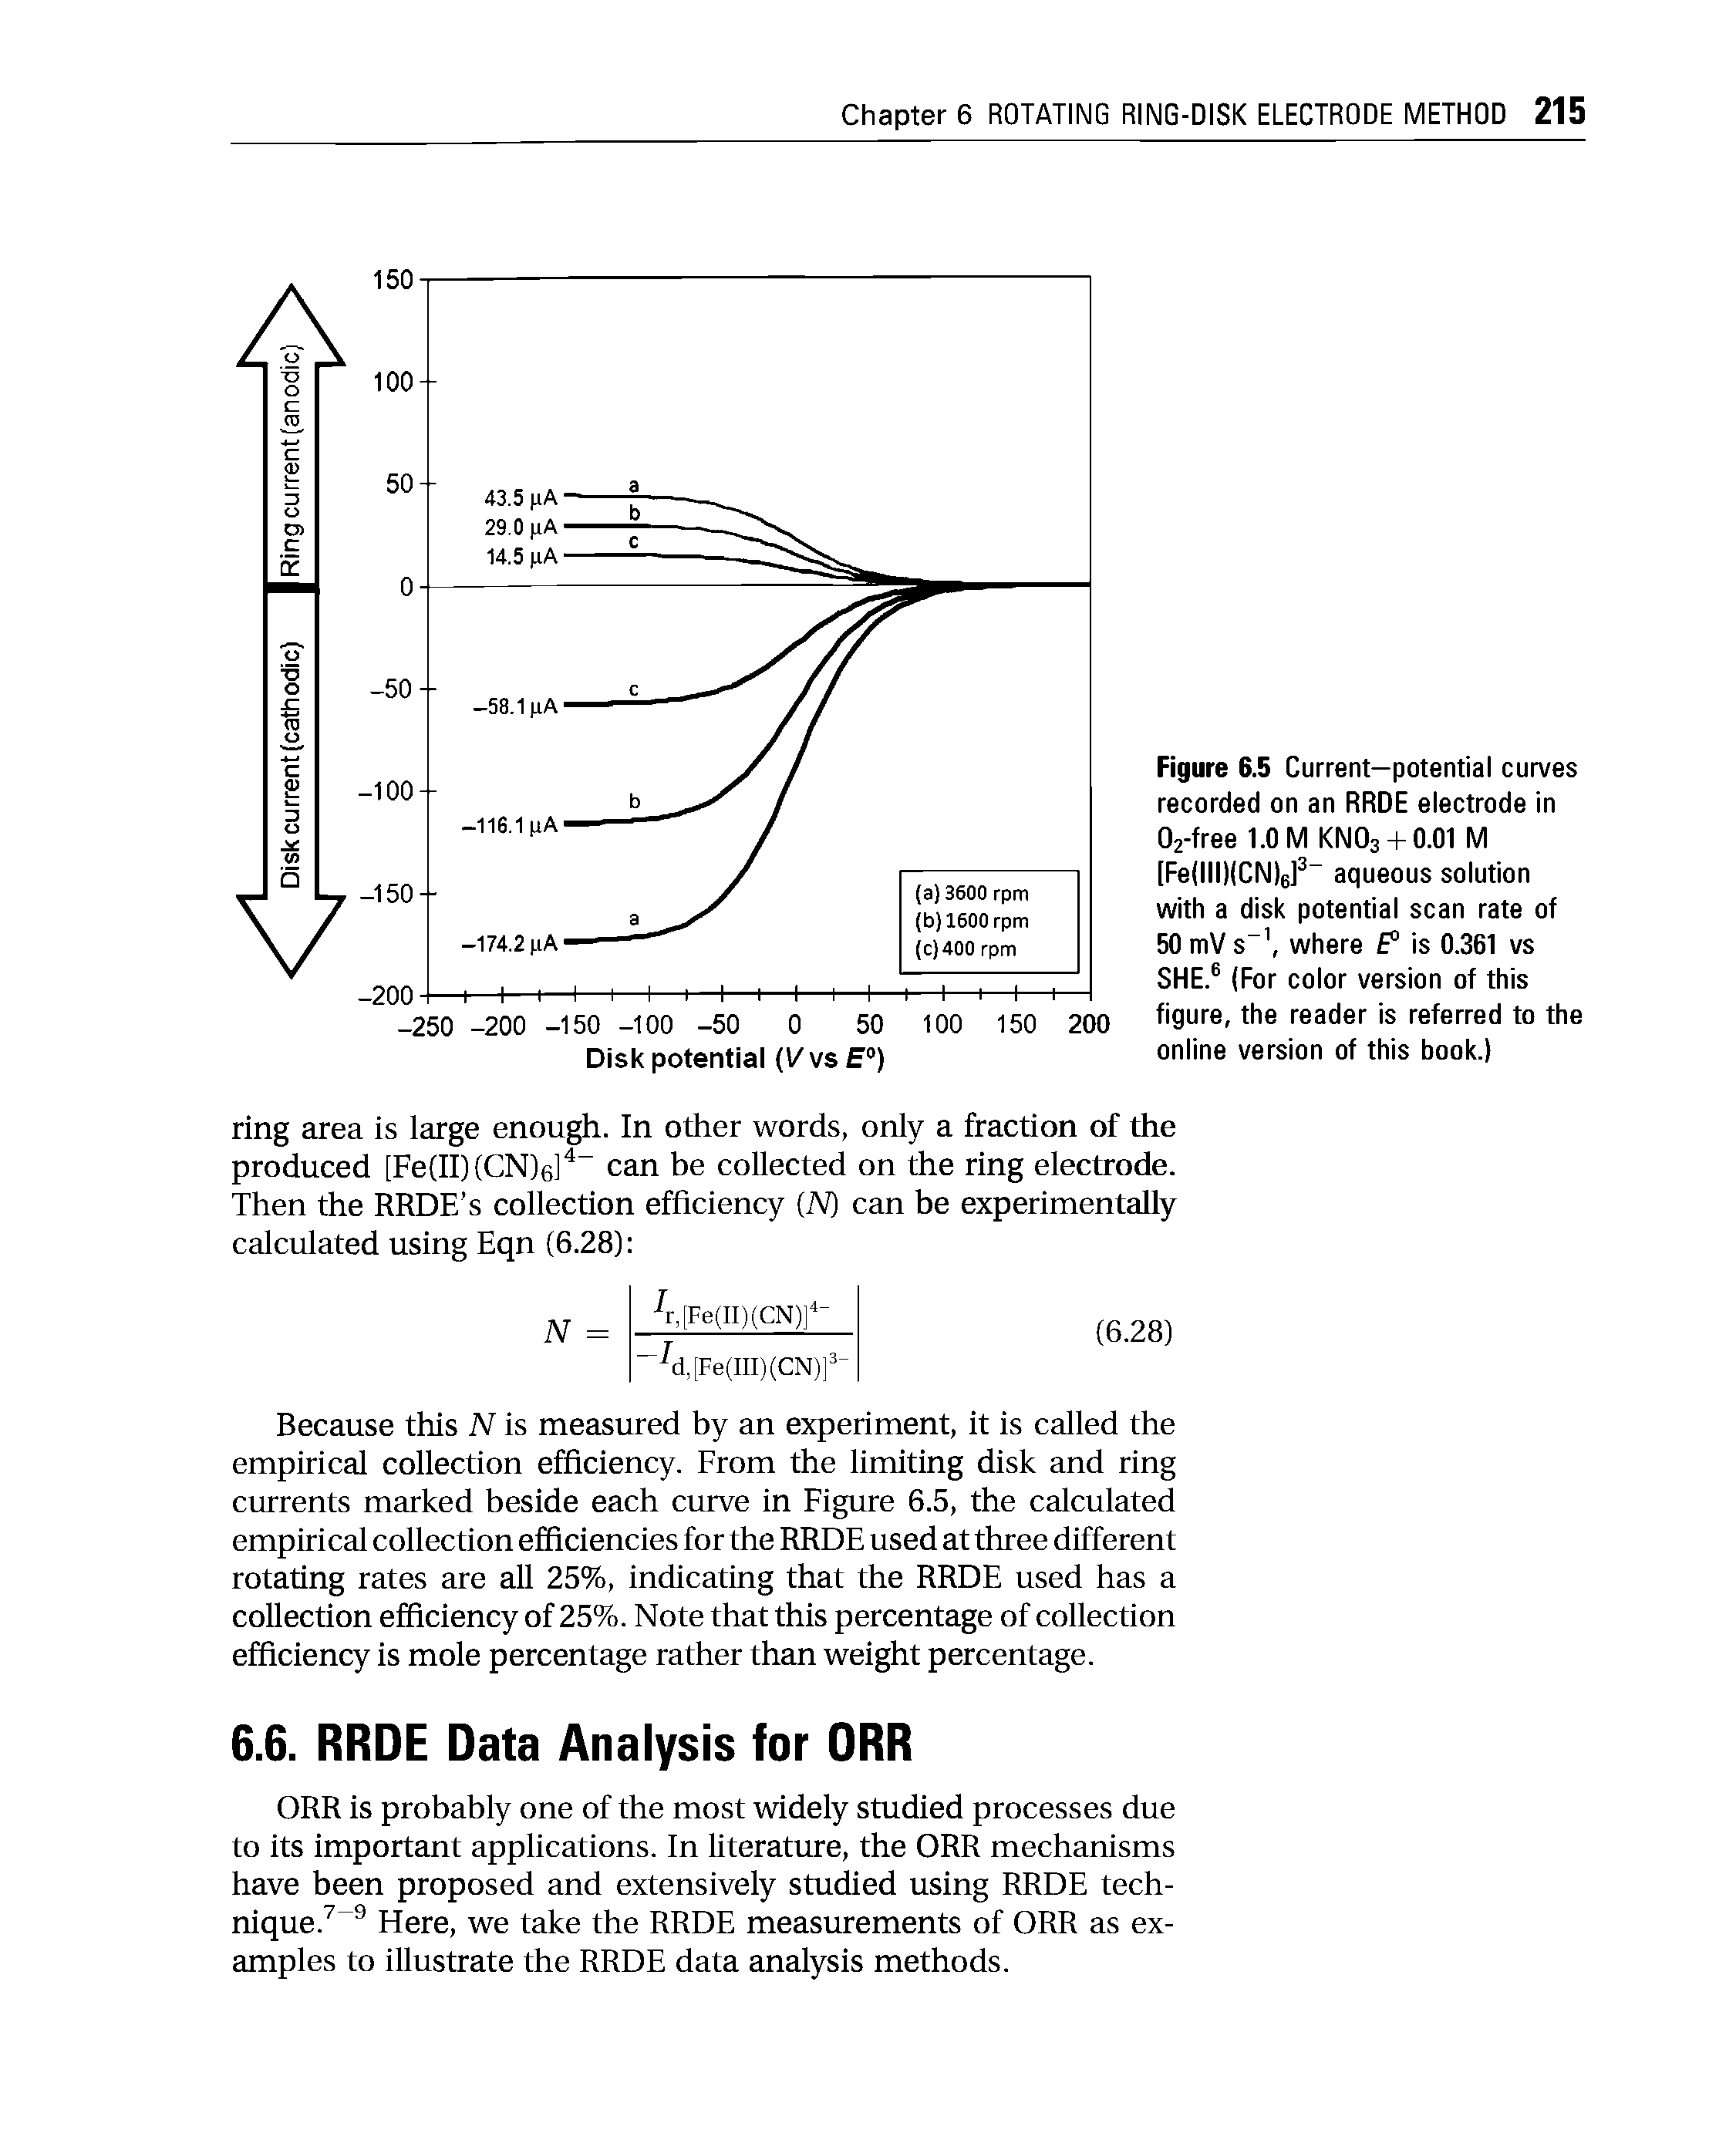 Figure 6.5 Current—potential curves recorded on an RRDE electrode in 02-free 1.0 M KNO3-1-0.01 M [Fe(lll)(CN)6] aqueous solution with a disk potential scan rate of 50 mV s where f is 0.361 vs SHE. (For color version of this figure, the reader is referred to the online version of this book.)...